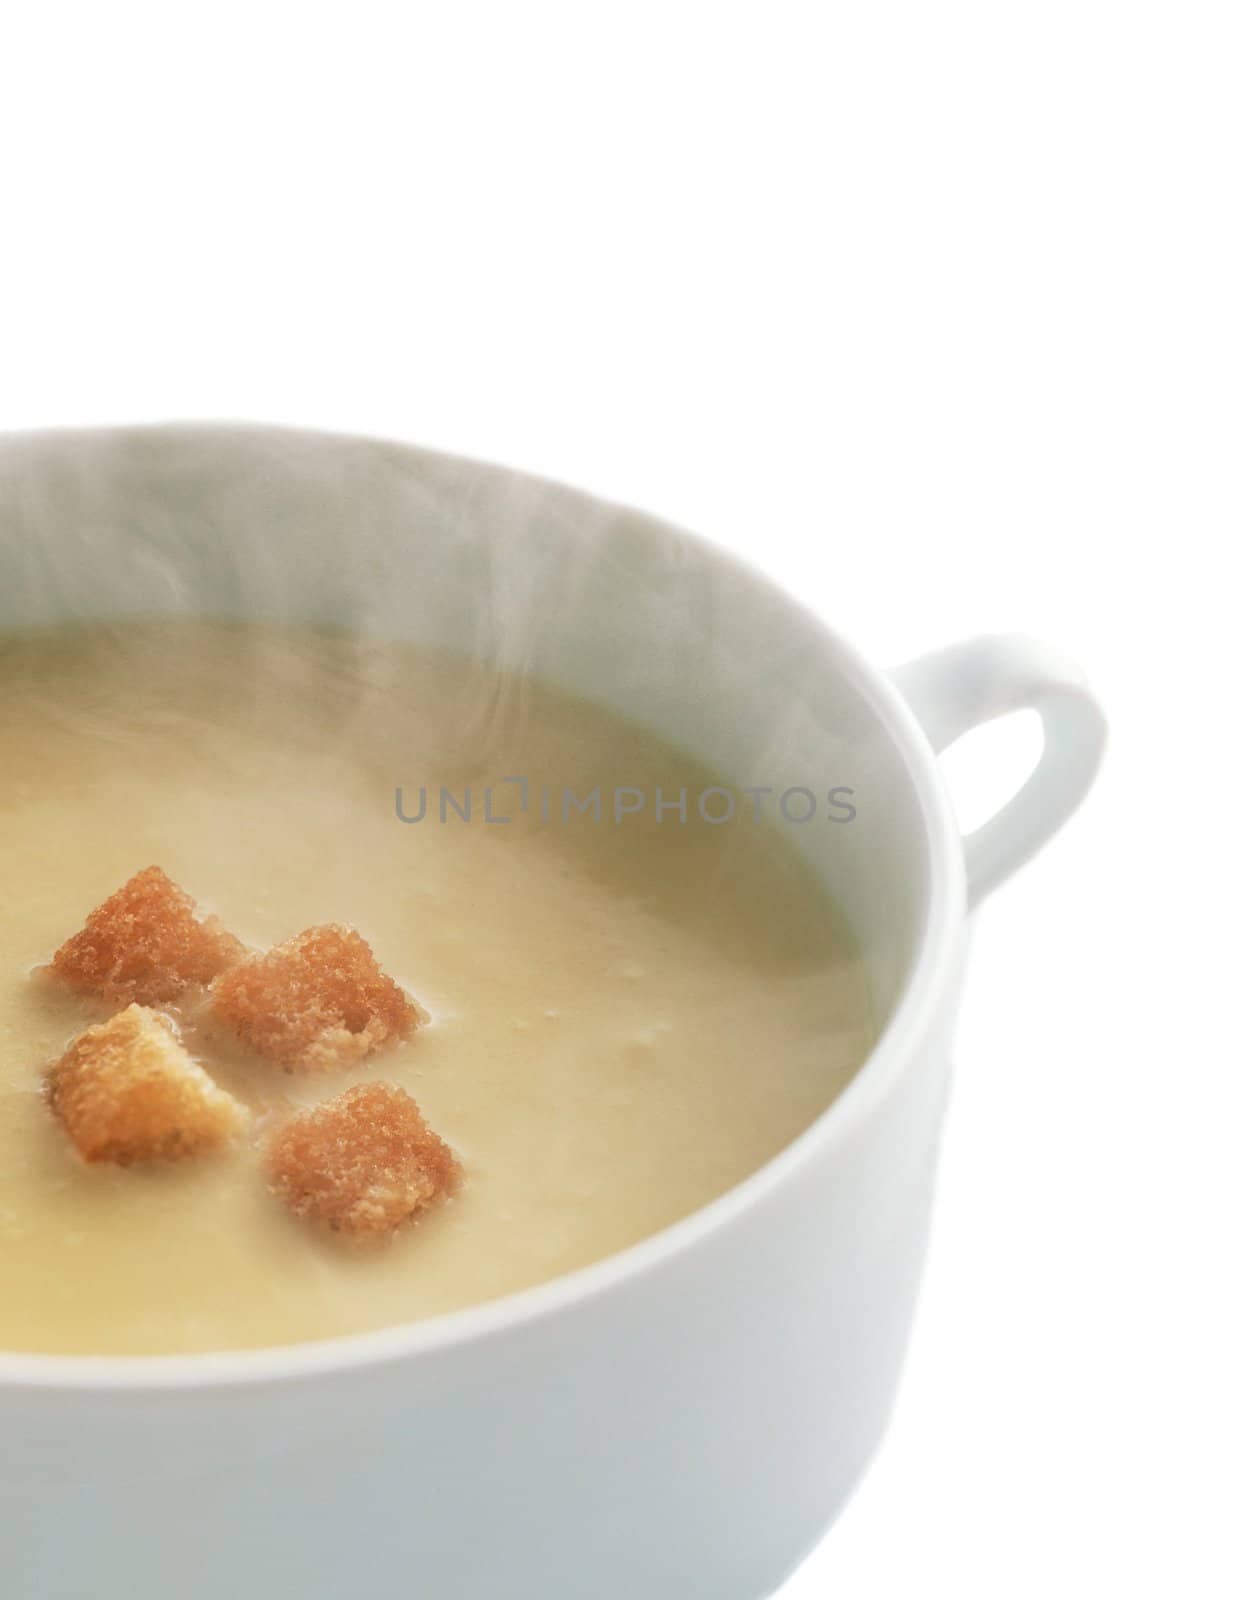 Lentil cream soup with dry bred crumbs